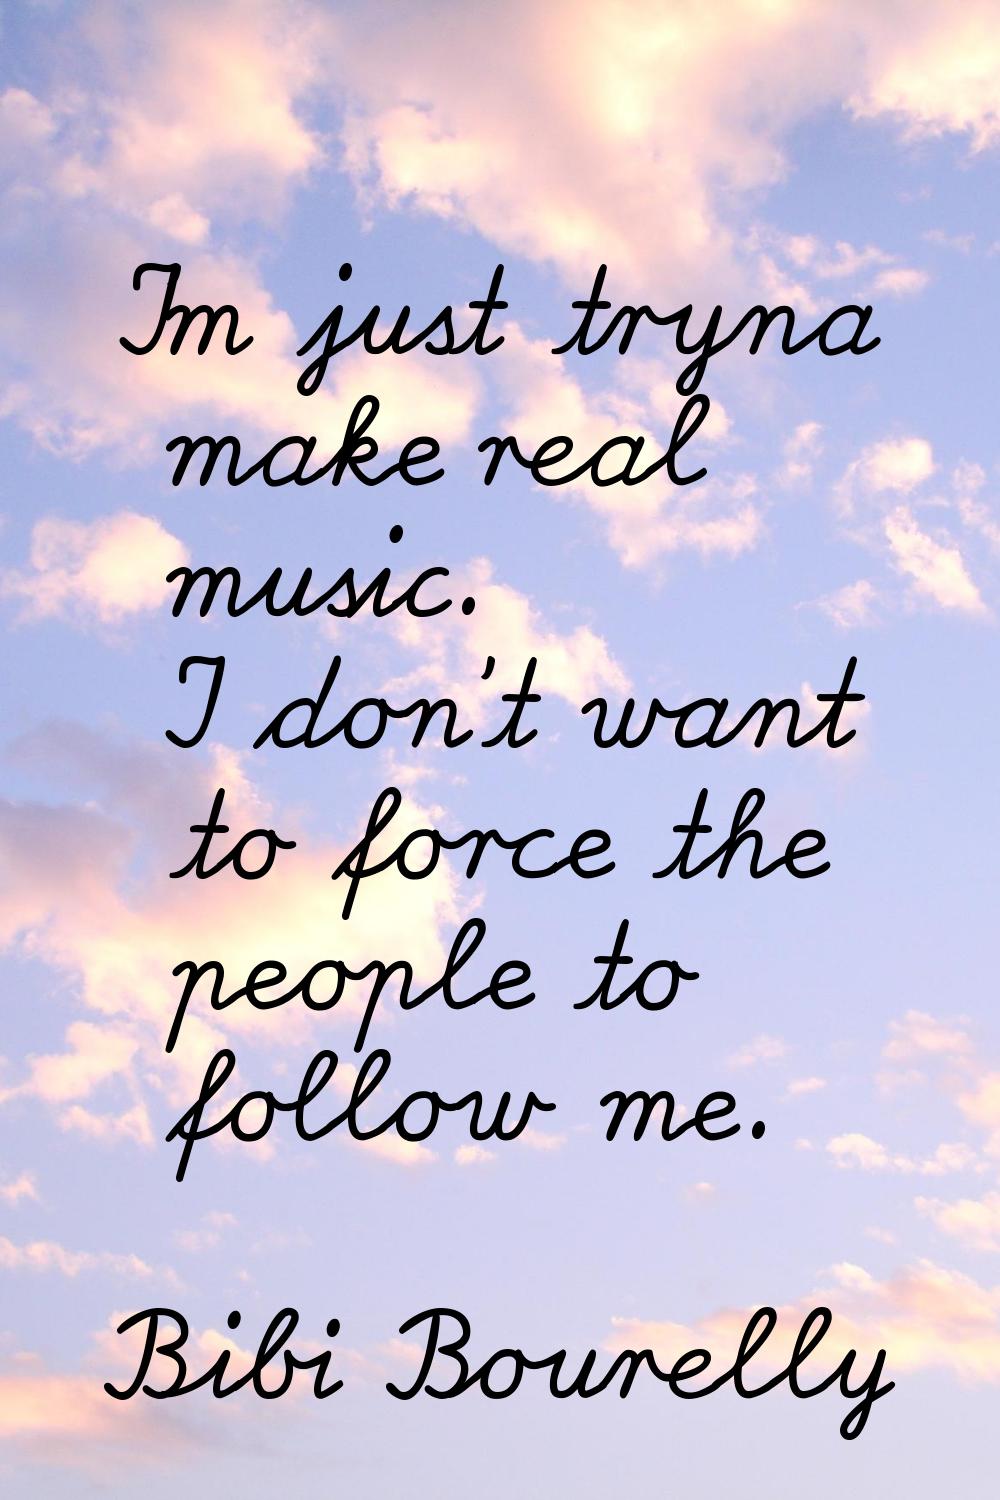 I'm just tryna make real music. I don't want to force the people to follow me.